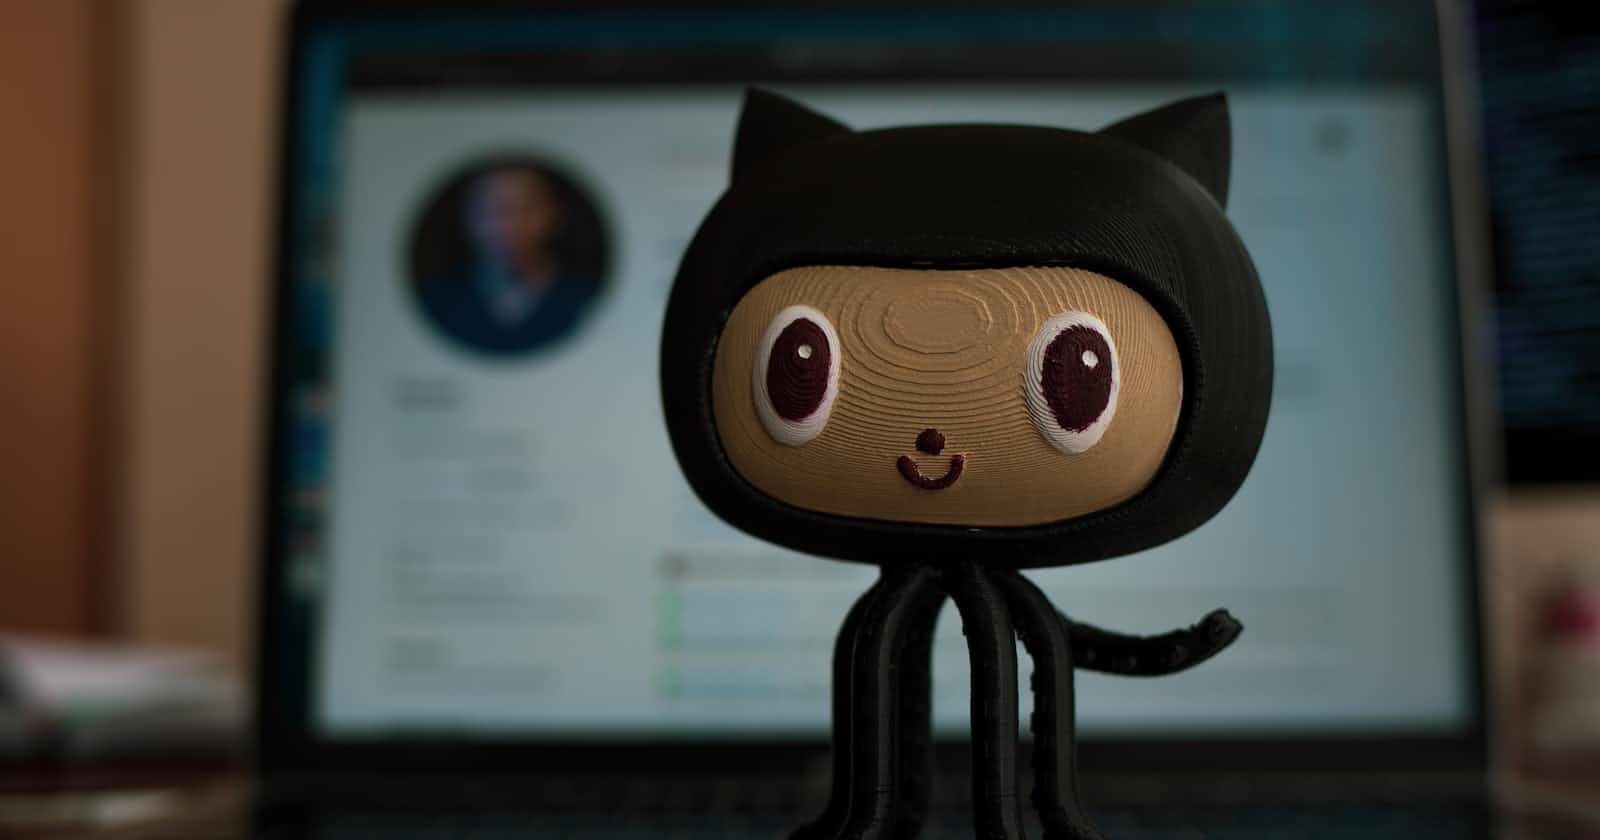 Getting Started With GitHub